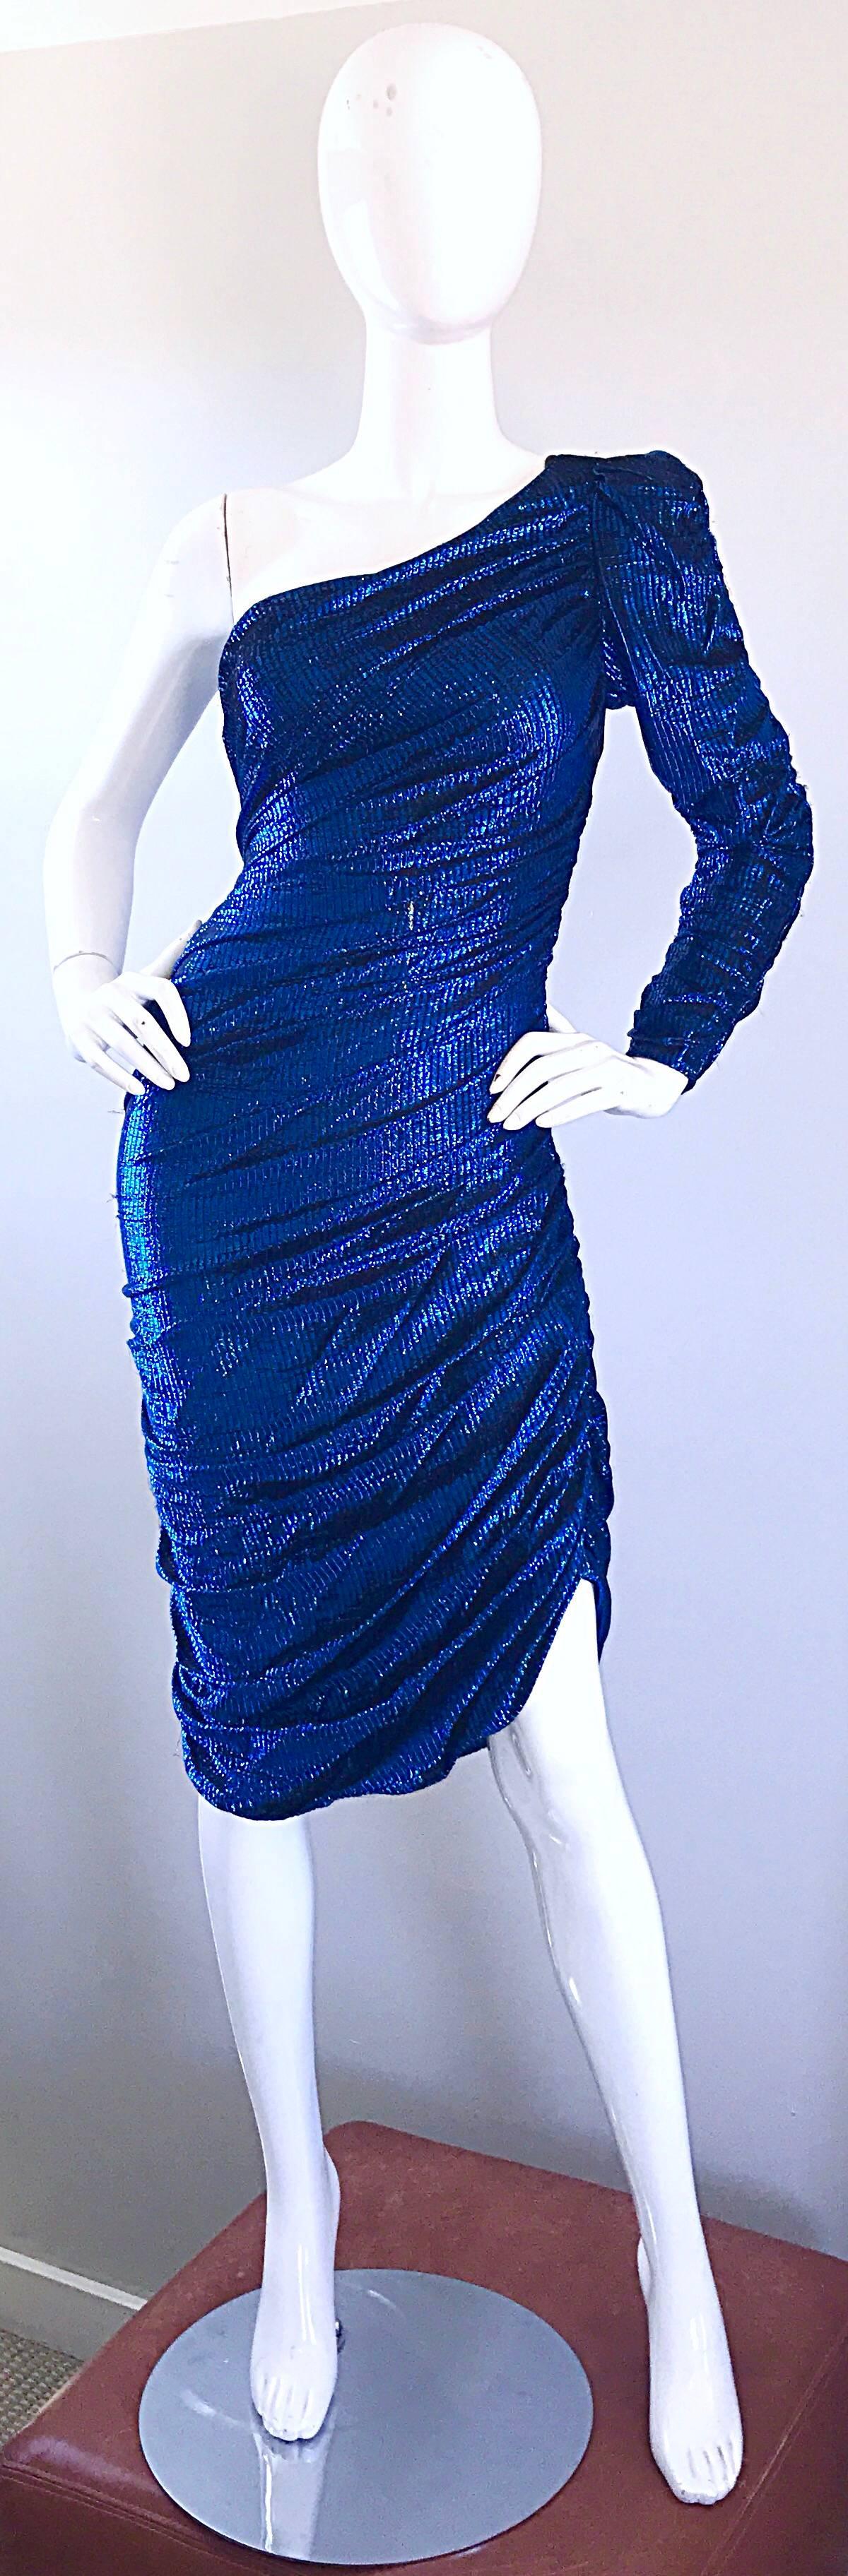 Sexy 1970s SAMIR electric blue metallic bodycon one shoulder disco dress! These dresses are so rare to come by, and I have had the privilege of owning two before. They each sold in a heartbeat. However, this is a much rarer larger size! Hidden